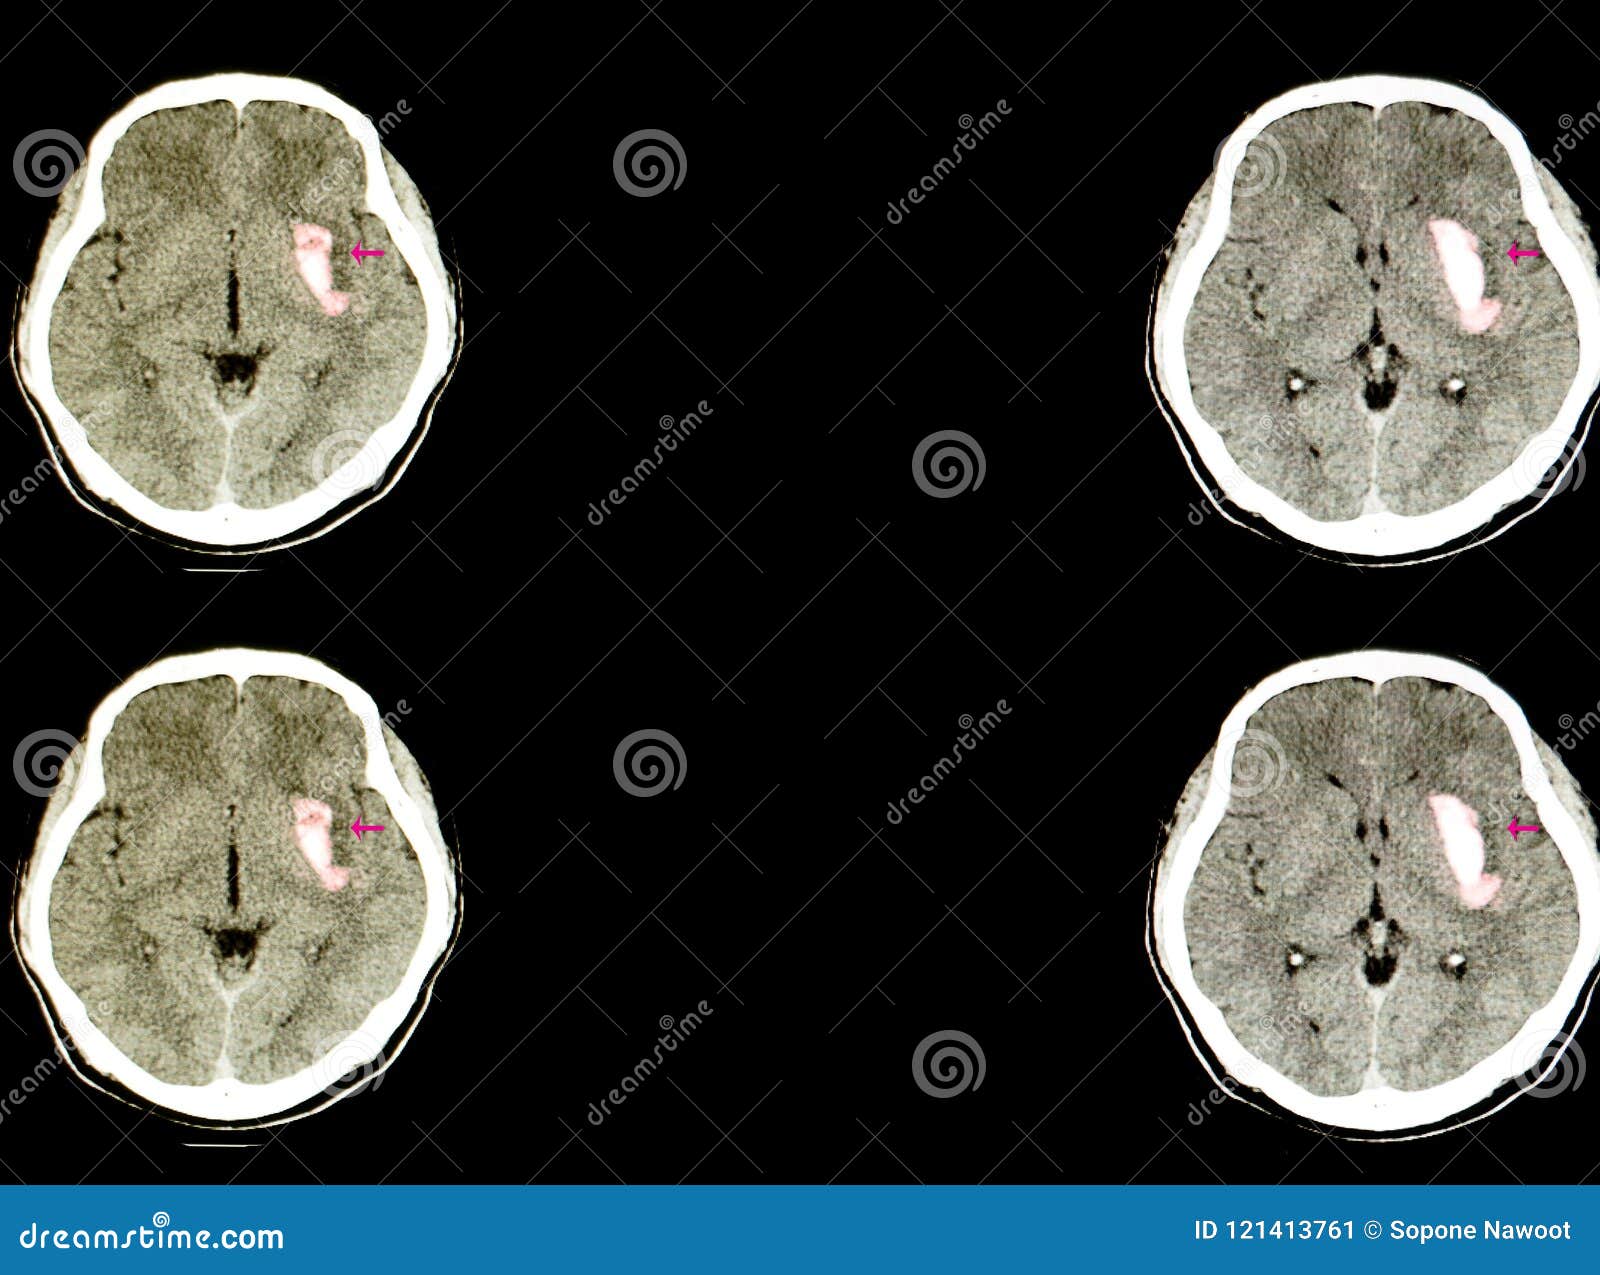 a patient with a large hematoma in the brain